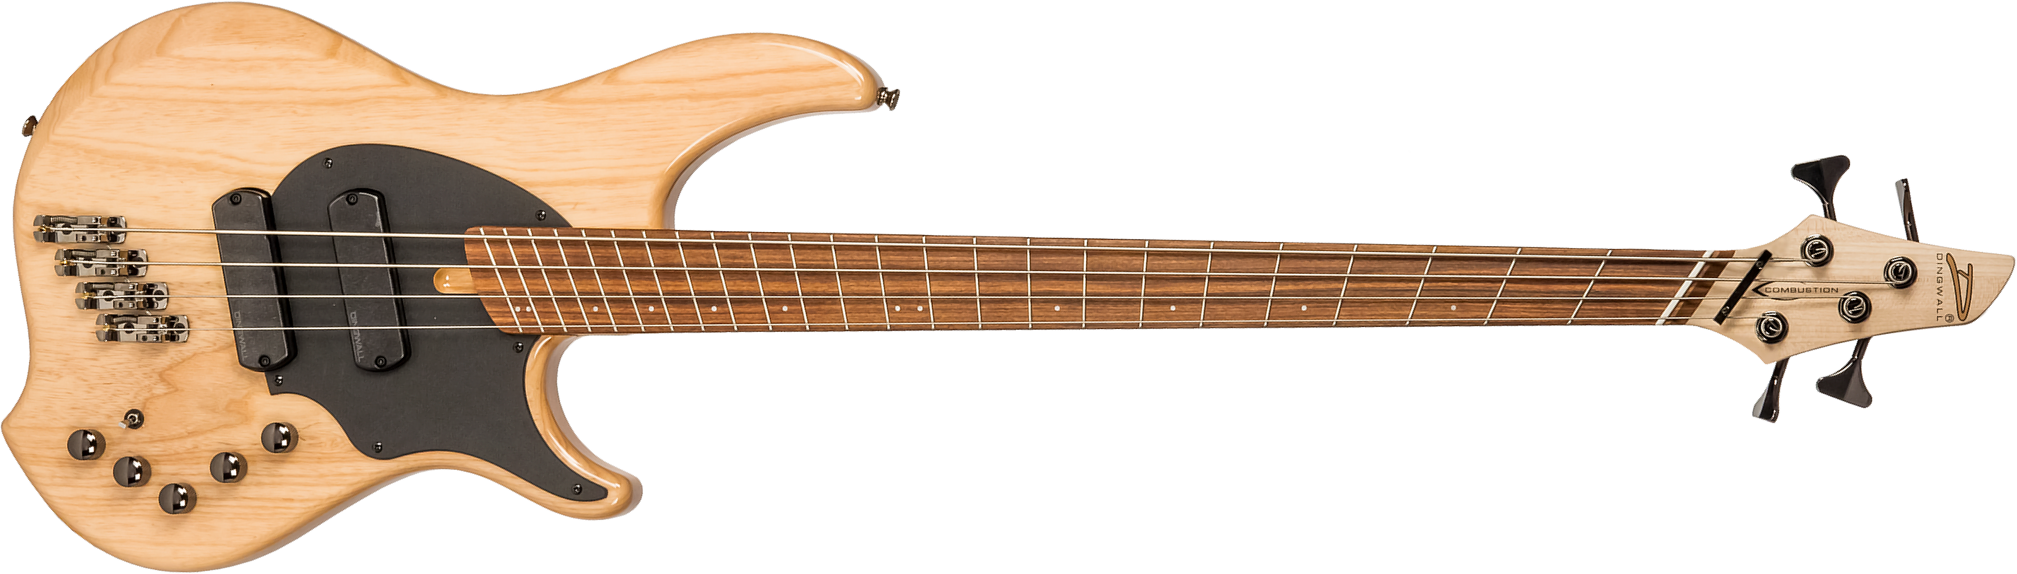 Dingwall Combustion Cb2 4c 2pu Active Pf - Natural - Solid body electric bass - Main picture